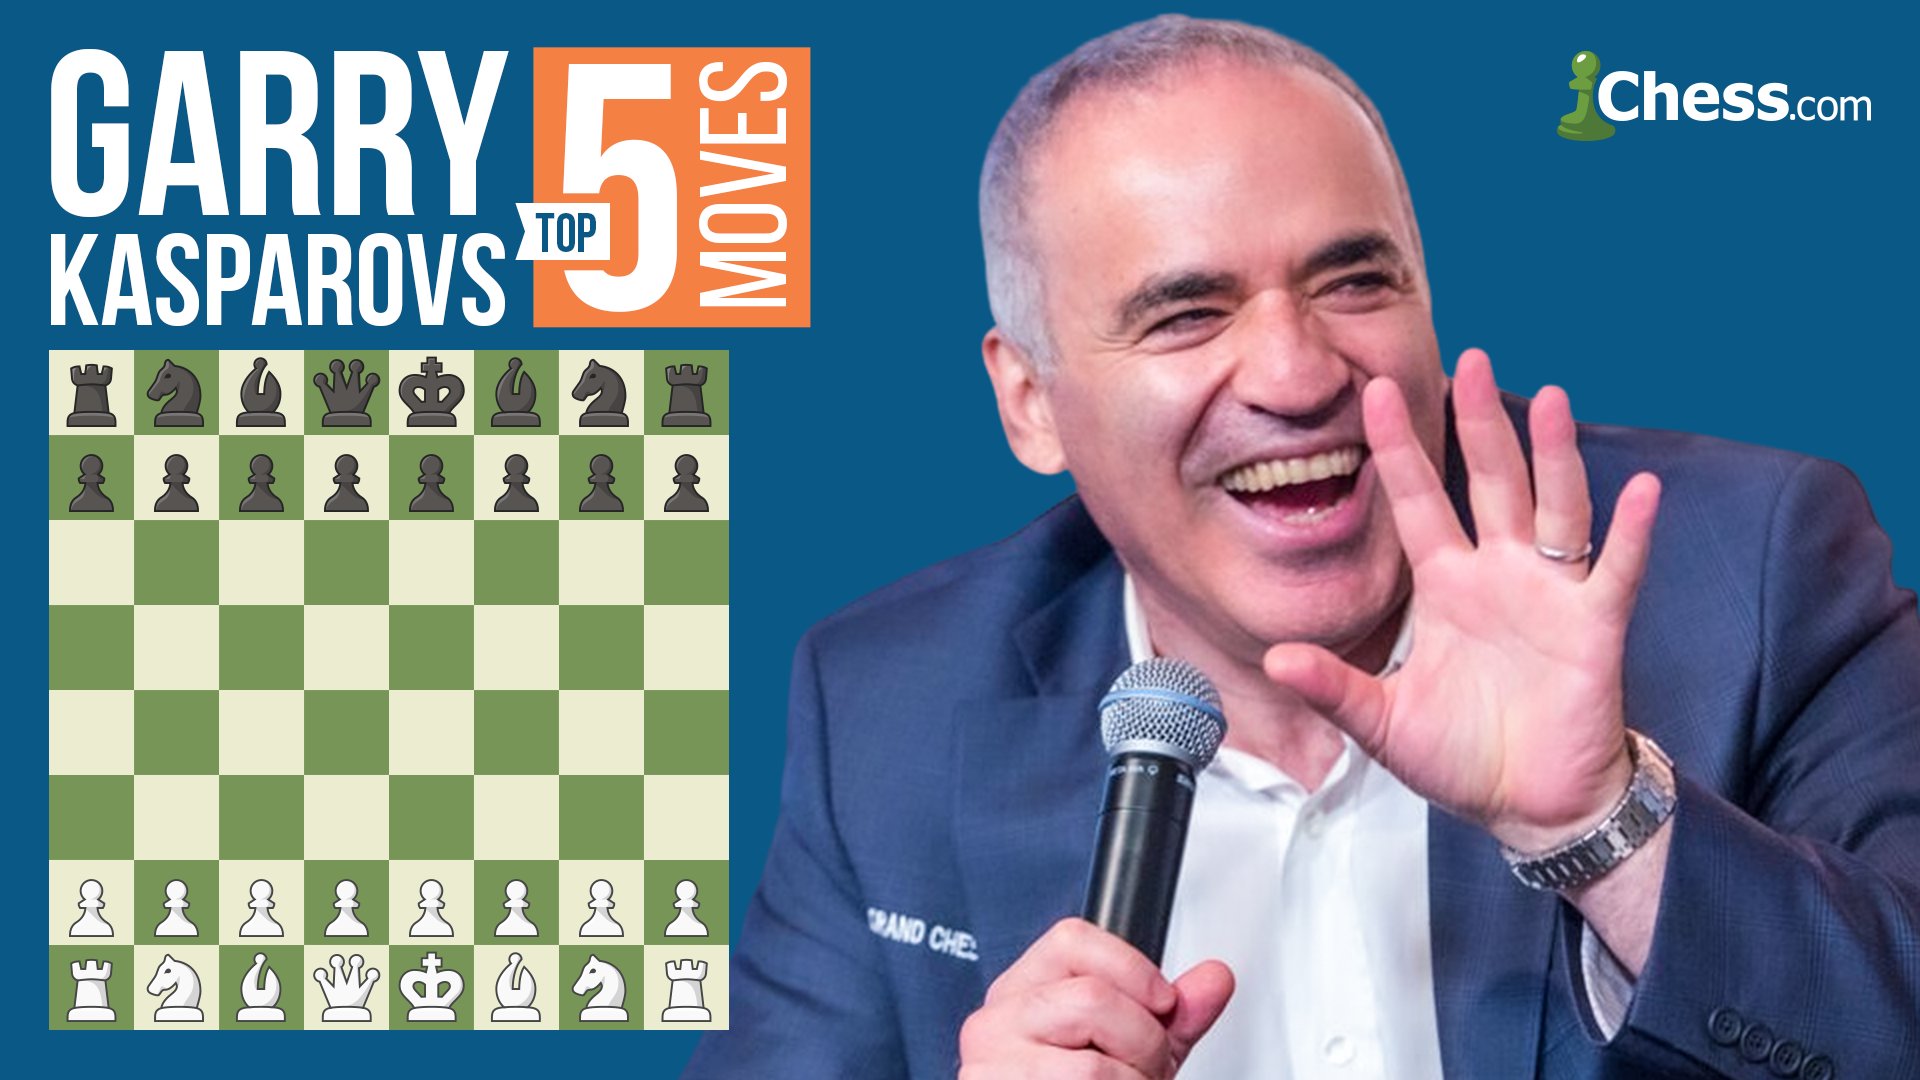 chess24 - Happy 58th Birthday to Garry Kasparov, arguably the greatest  chess player of all time!